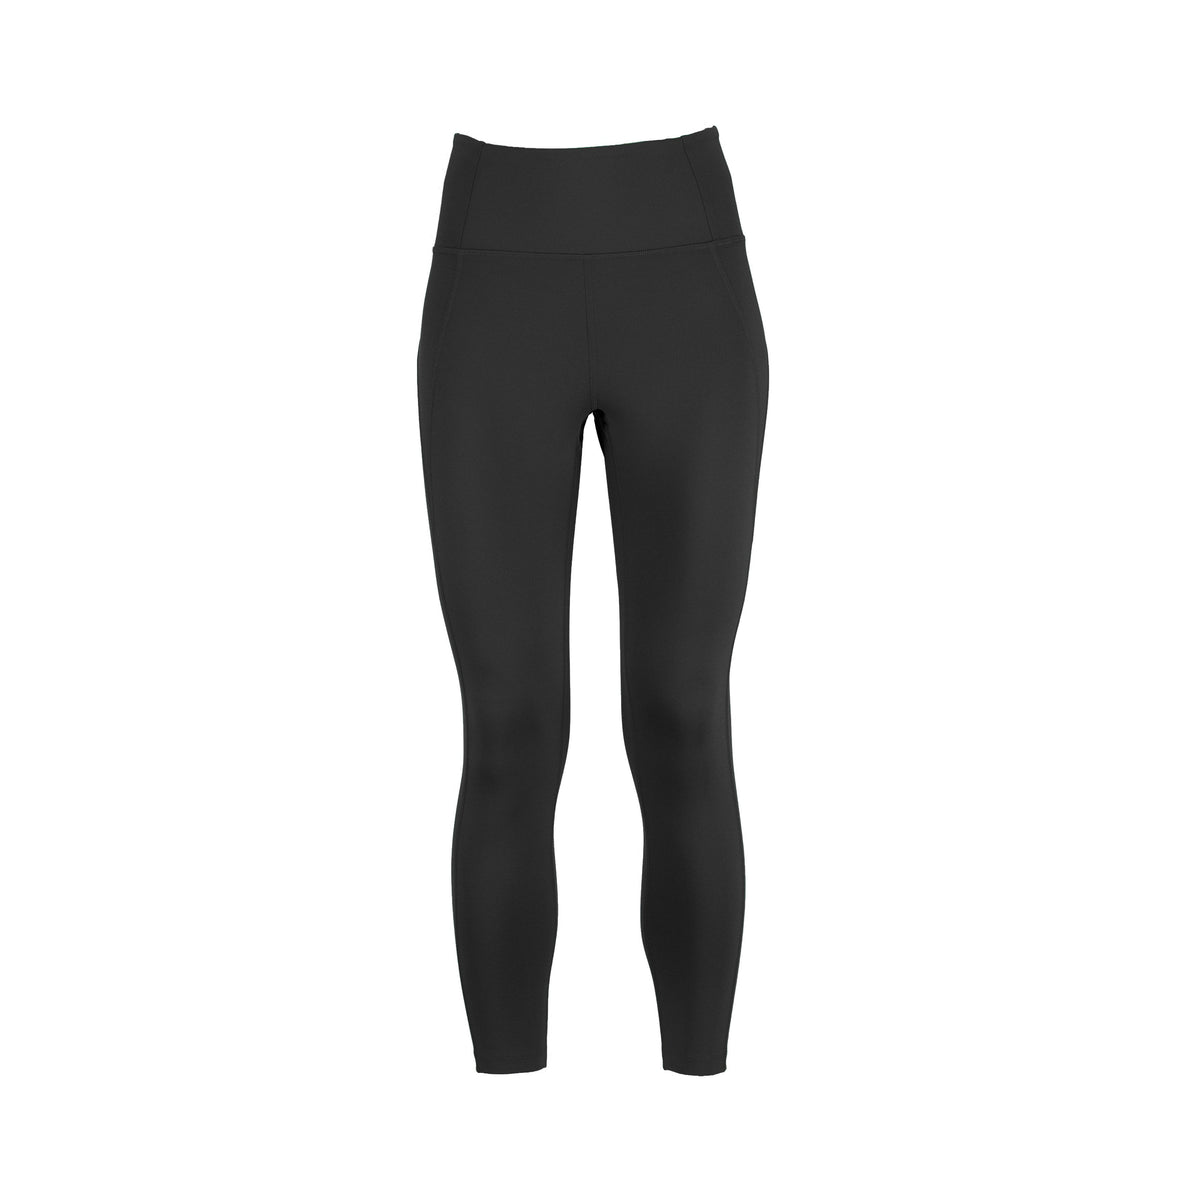 High-waisted compression leggings, 7/8